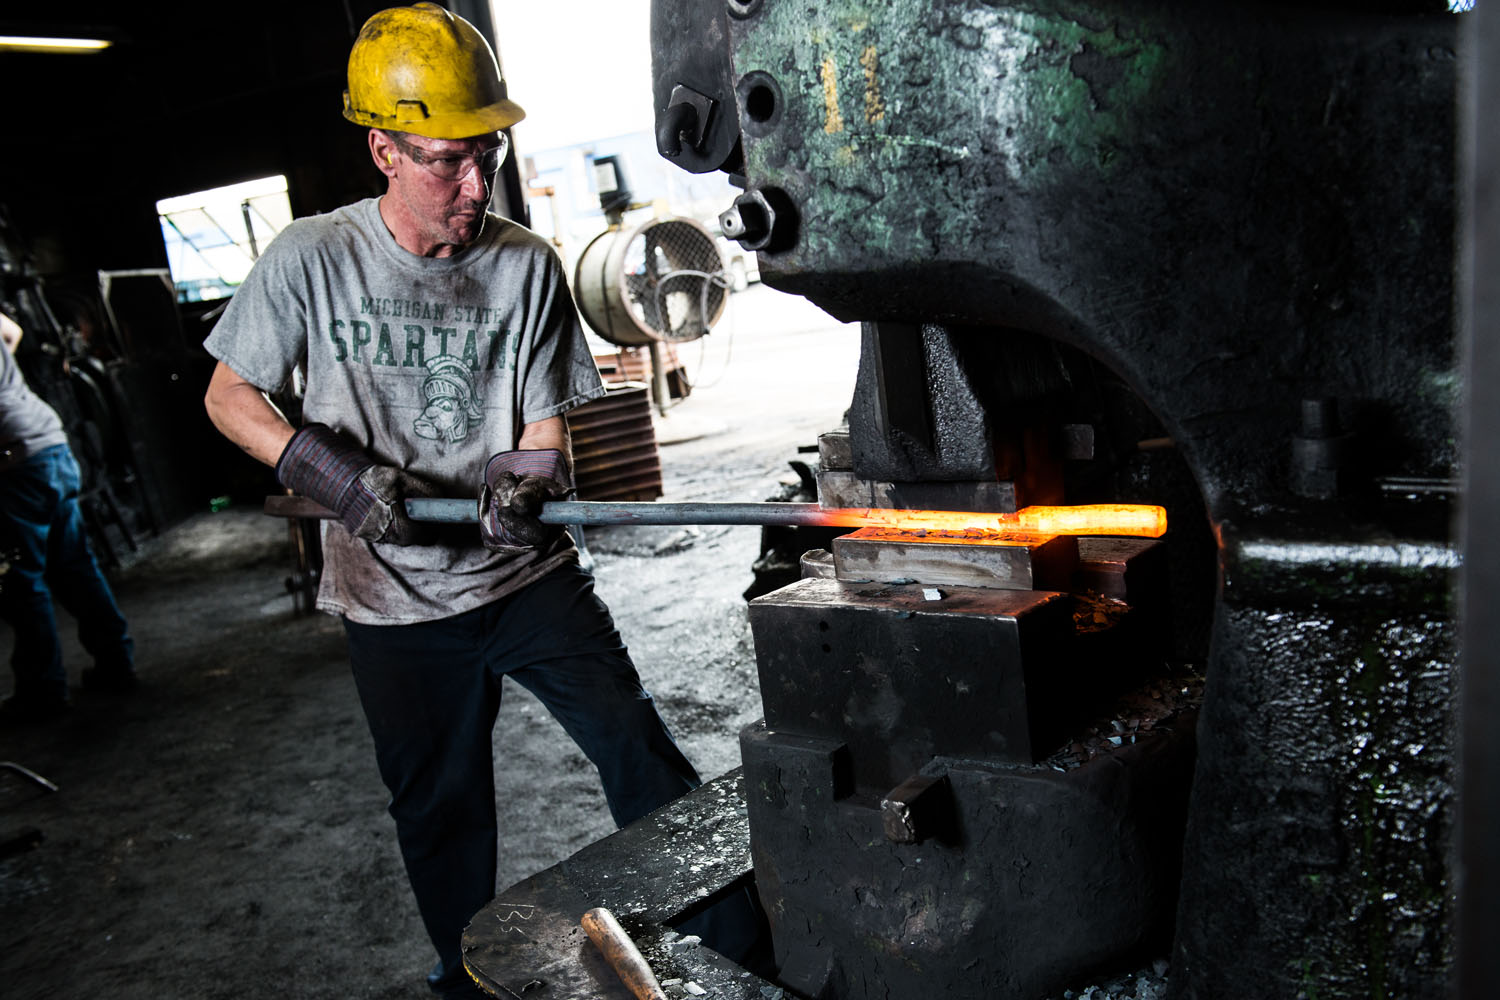 Lansing Forge, INC. Commercial Photography